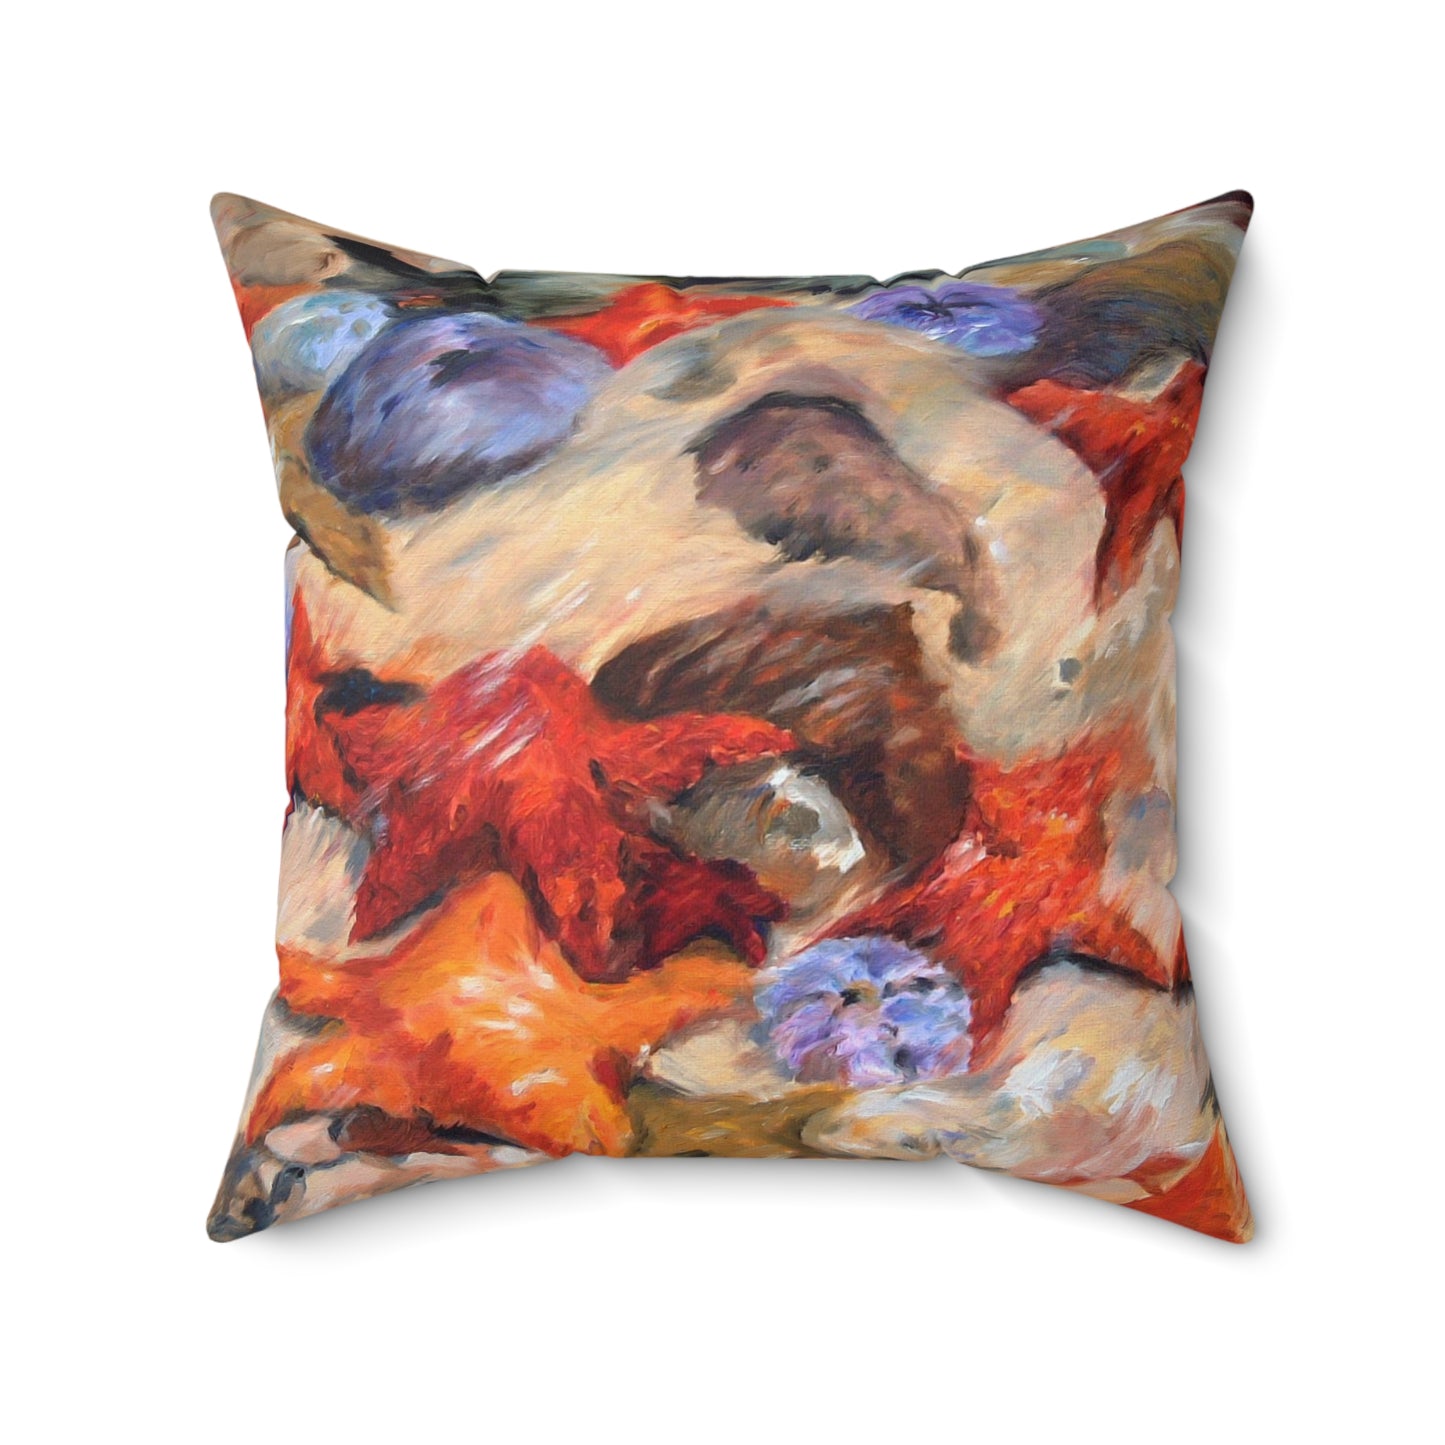 Starfish Pillow - Spun Polyester Square Pillow with Zipper and Insert